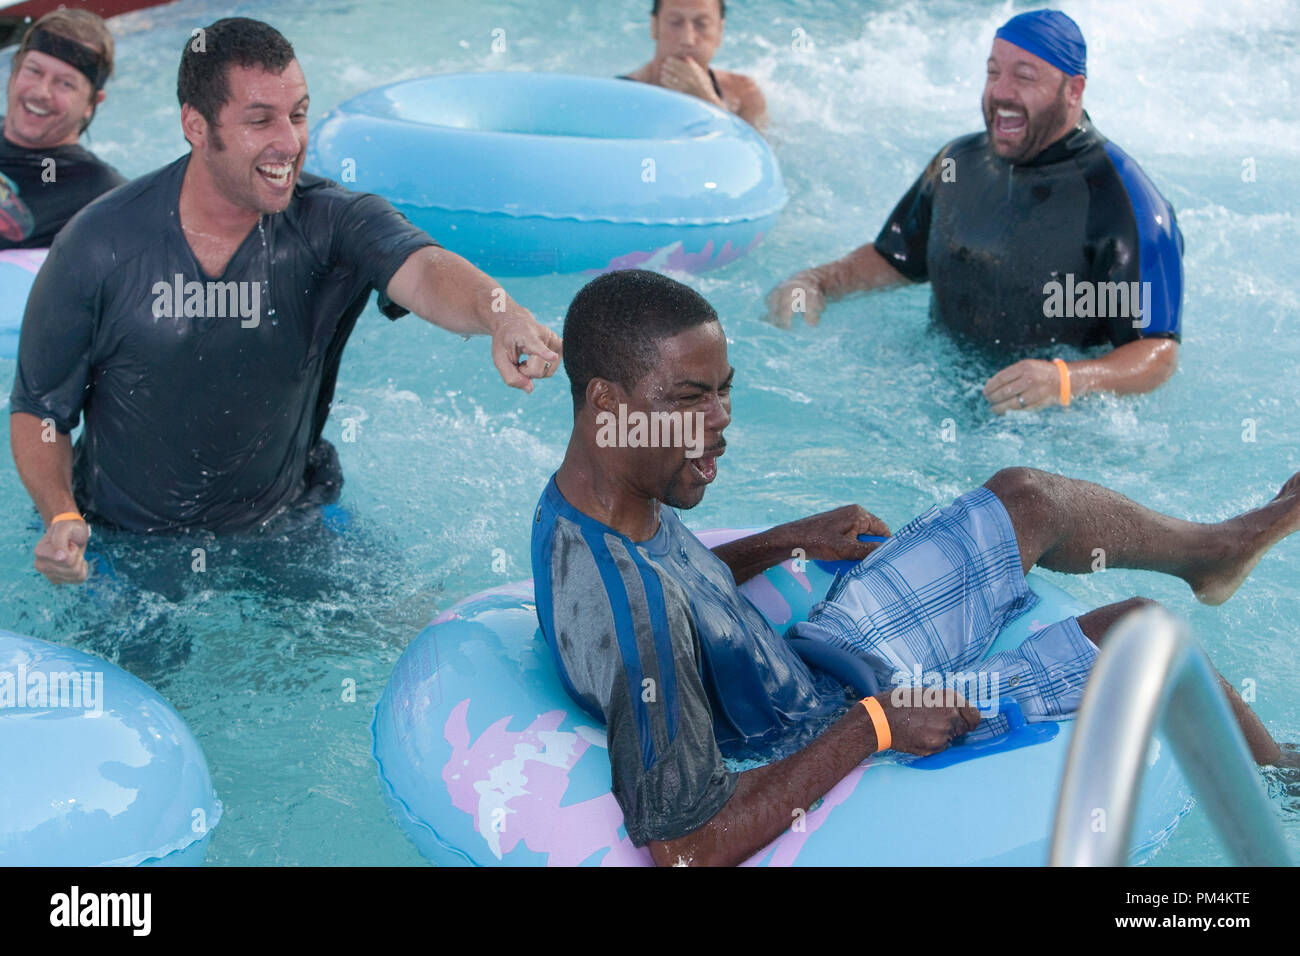 Adam Sandler as 'Lenny Feder', Chris Rock as 'Kurt McKenzie' and Kevin James as 'Eric Lamonsoff' in Columbia Pictures' GROWN UPS. Stock Photo